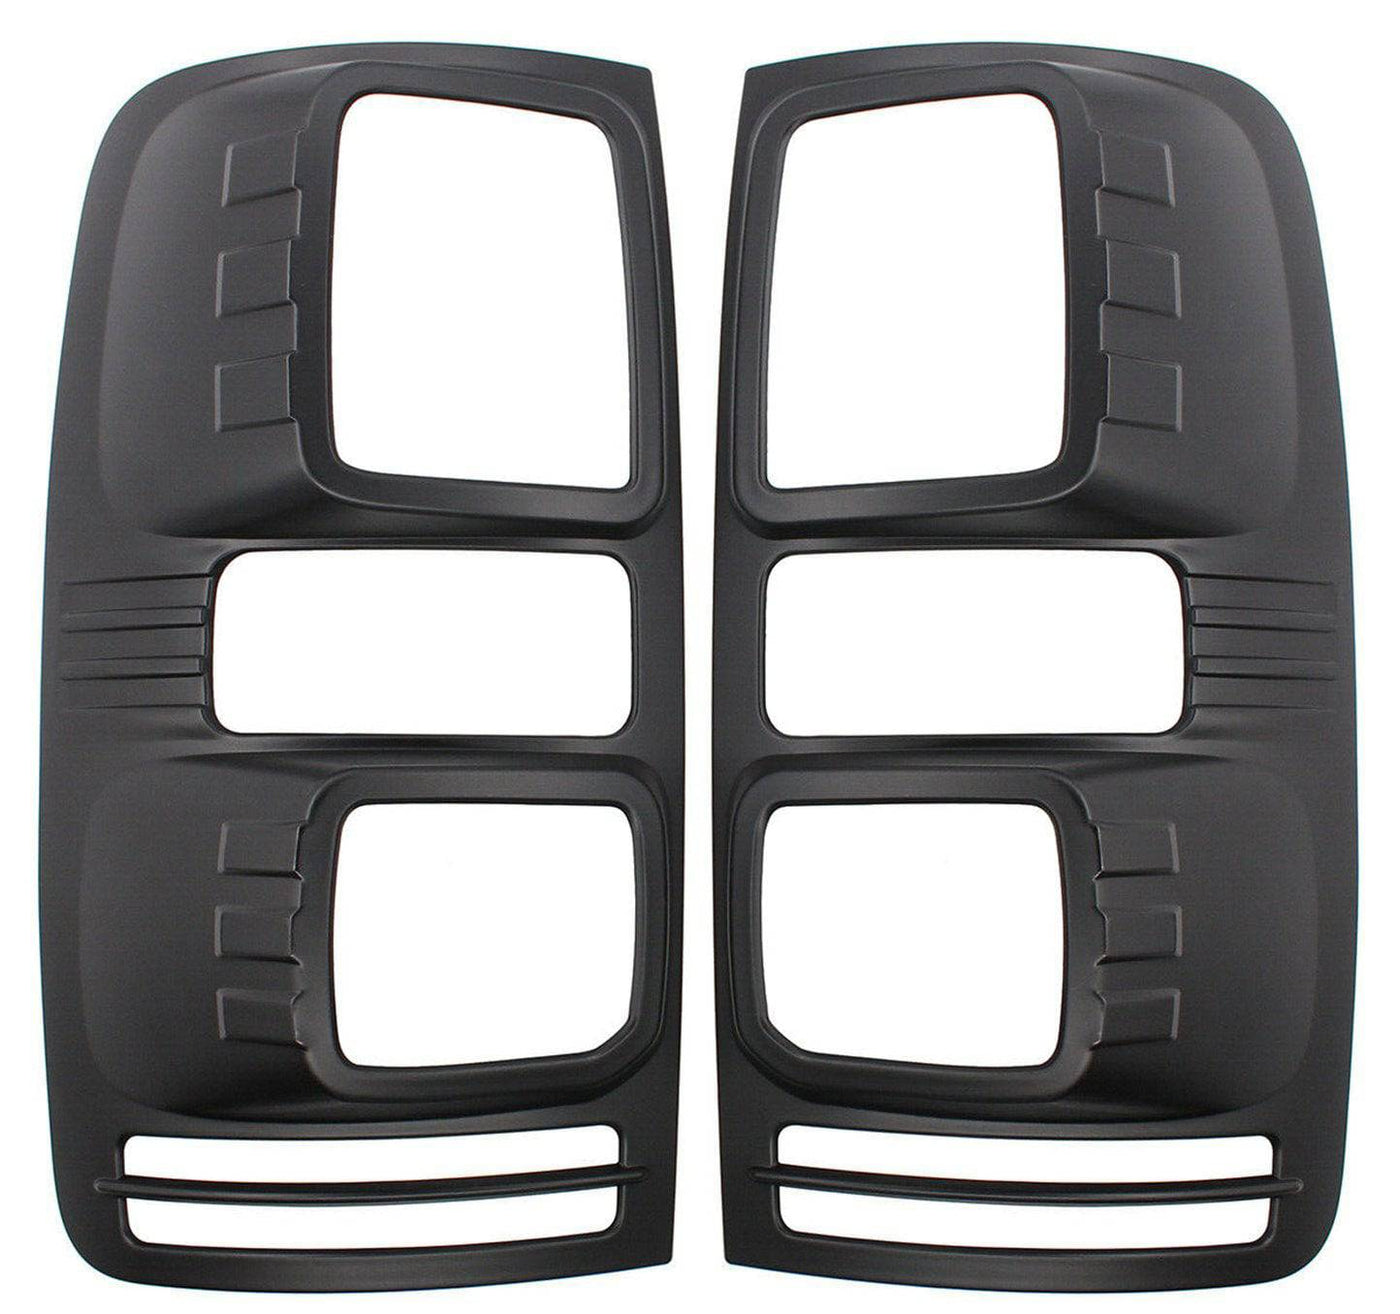 Tail Light Cover Protector Suits Holden Colorado 2012-2019 (Online Only)